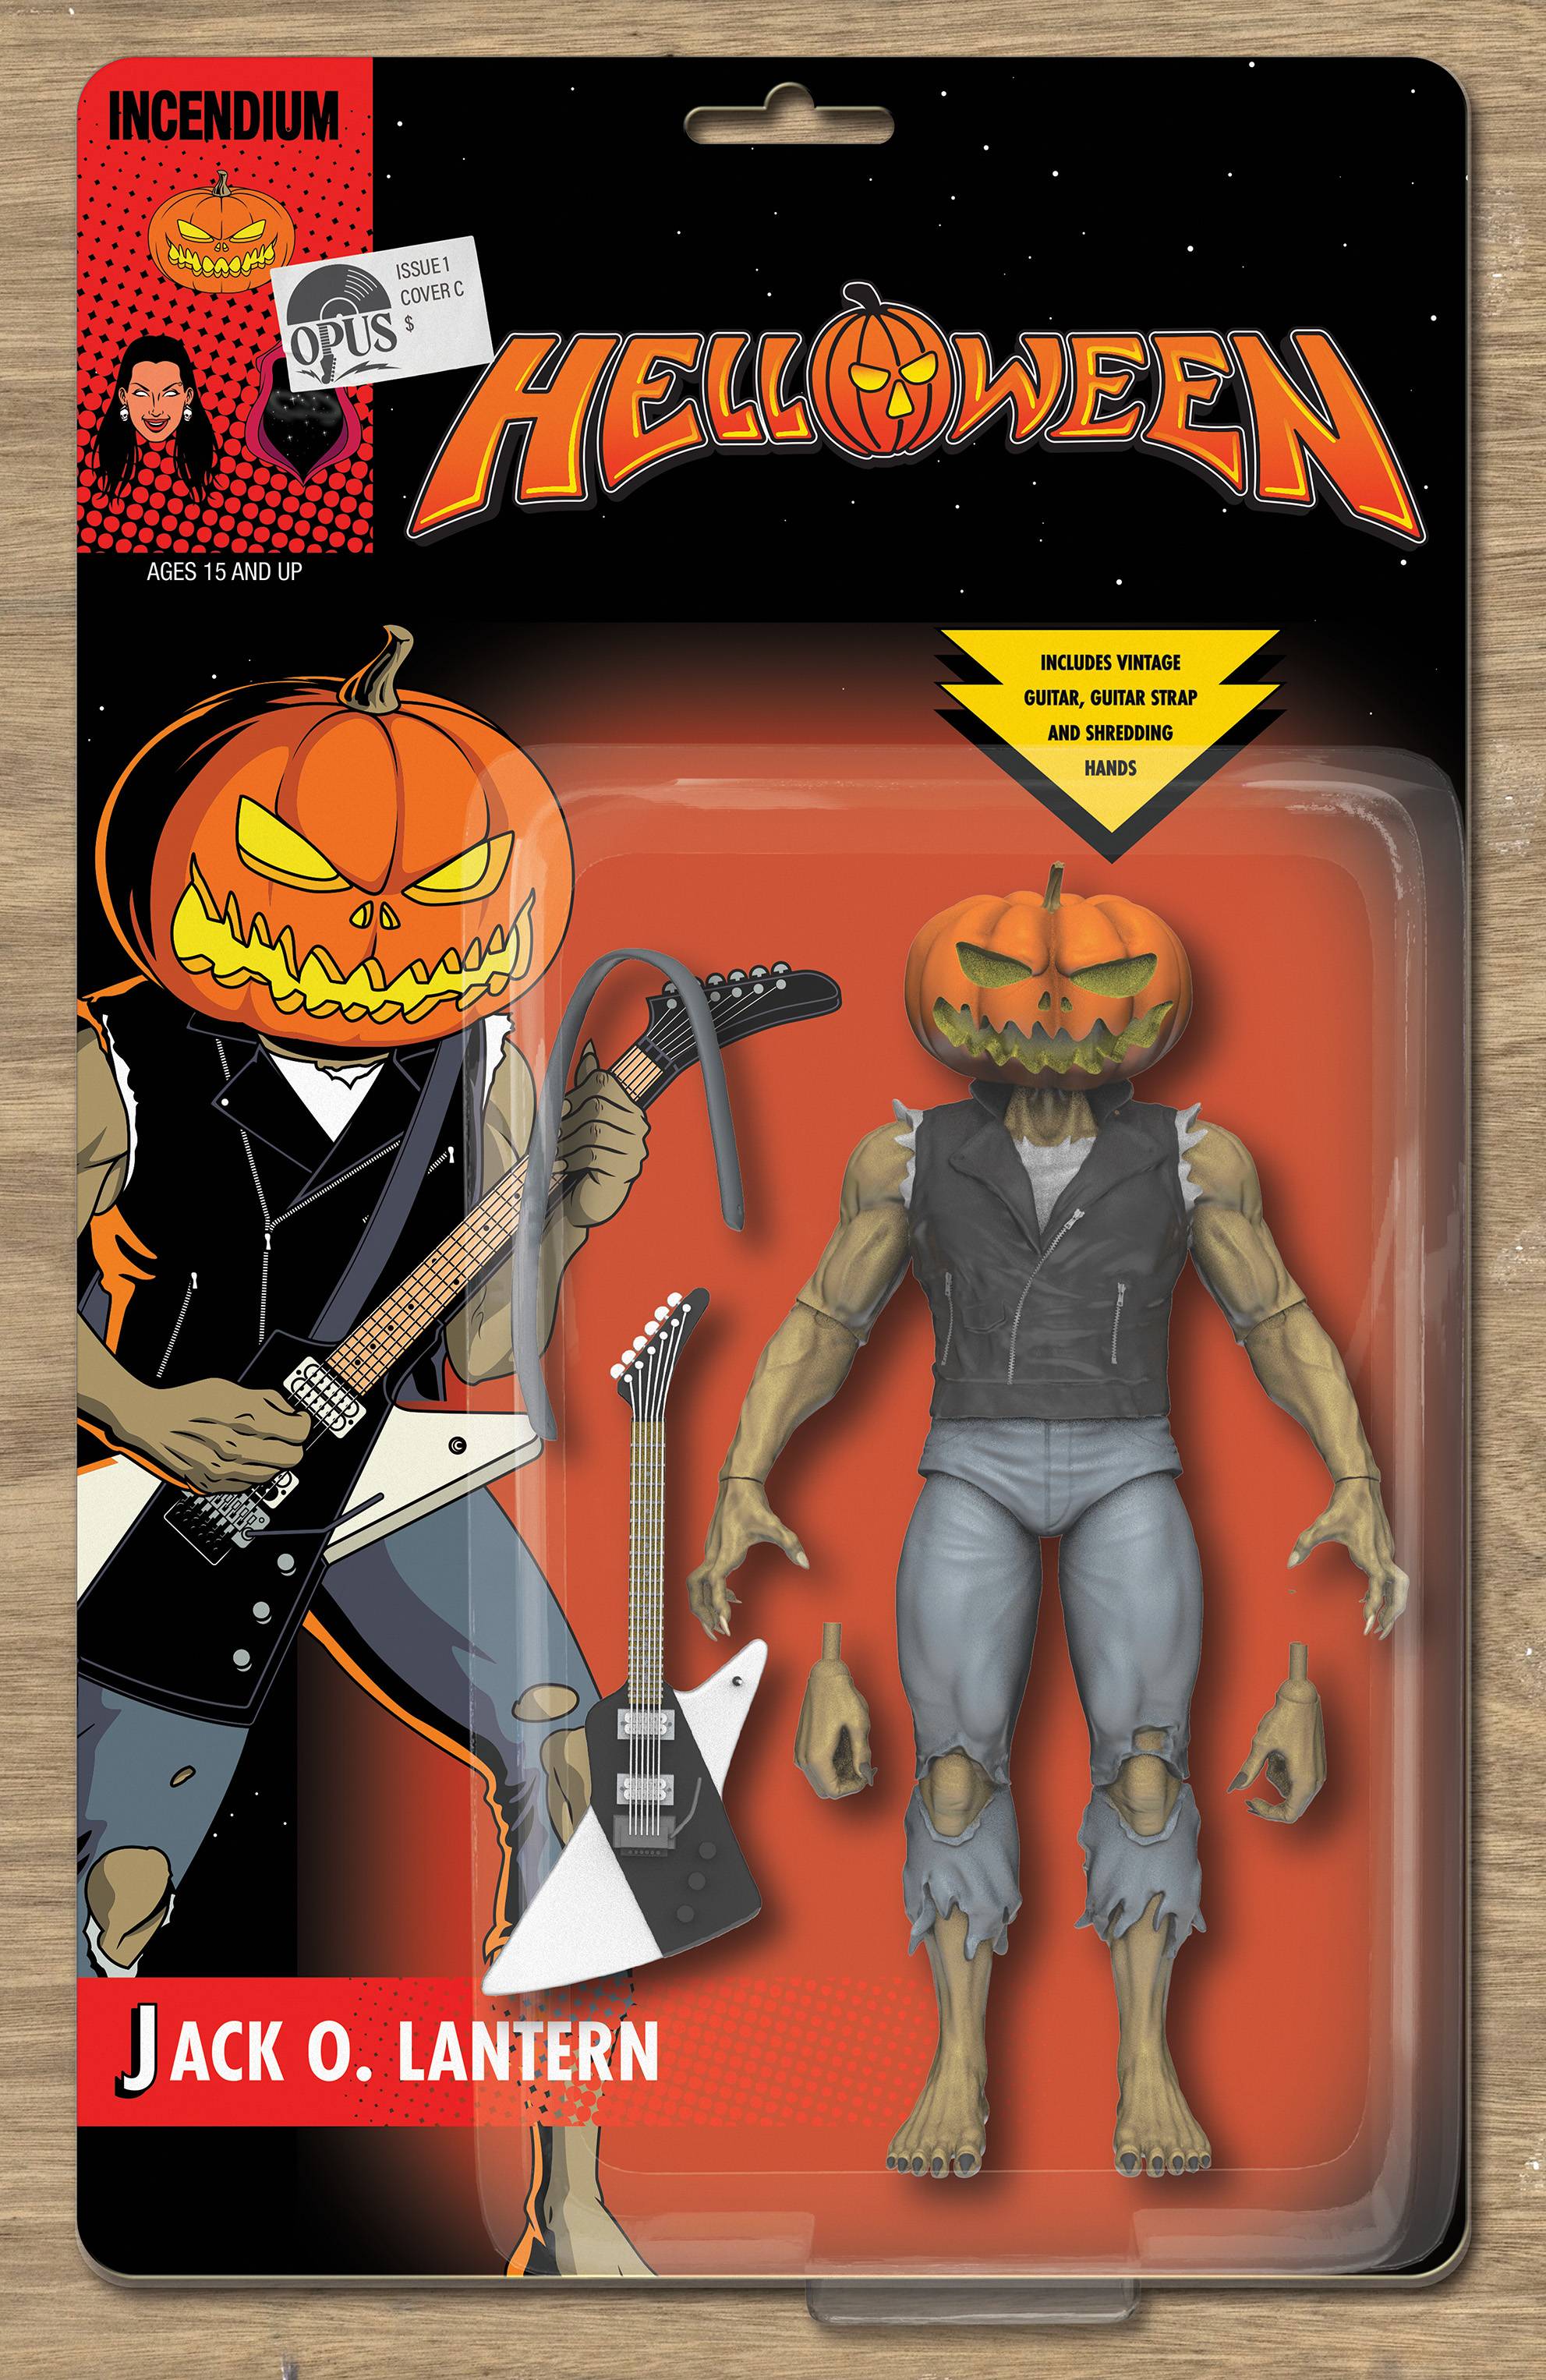 Helloween #1 Cover C 1 for 10 Incentive Jack O Lantern Action Figure Variant (Of 3)